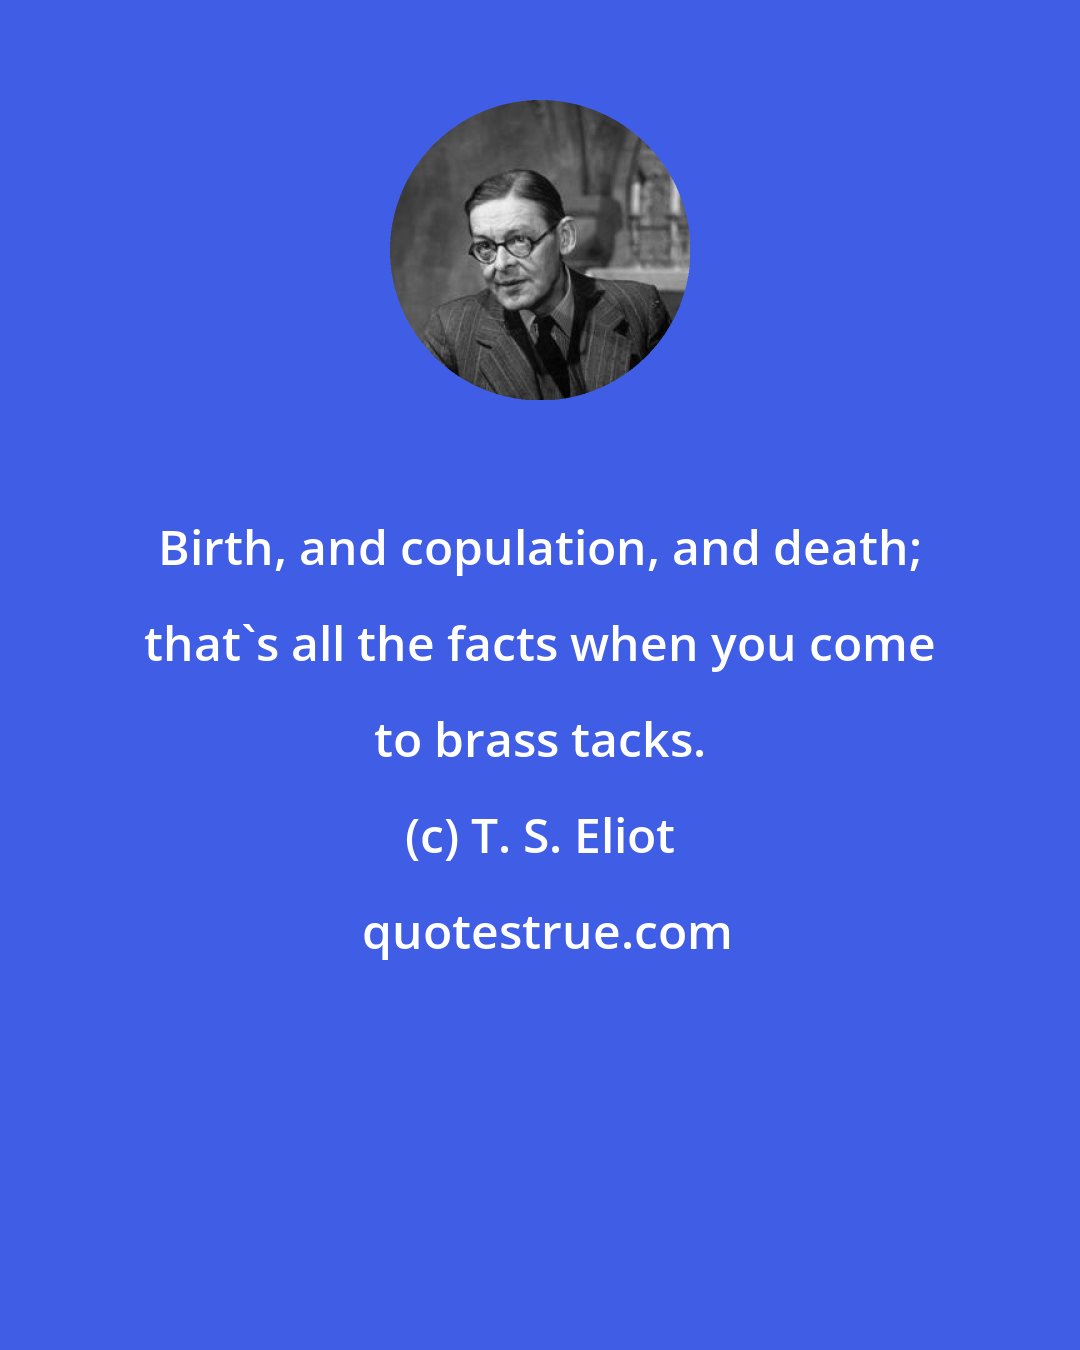 T. S. Eliot: Birth, and copulation, and death; that's all the facts when you come to brass tacks.